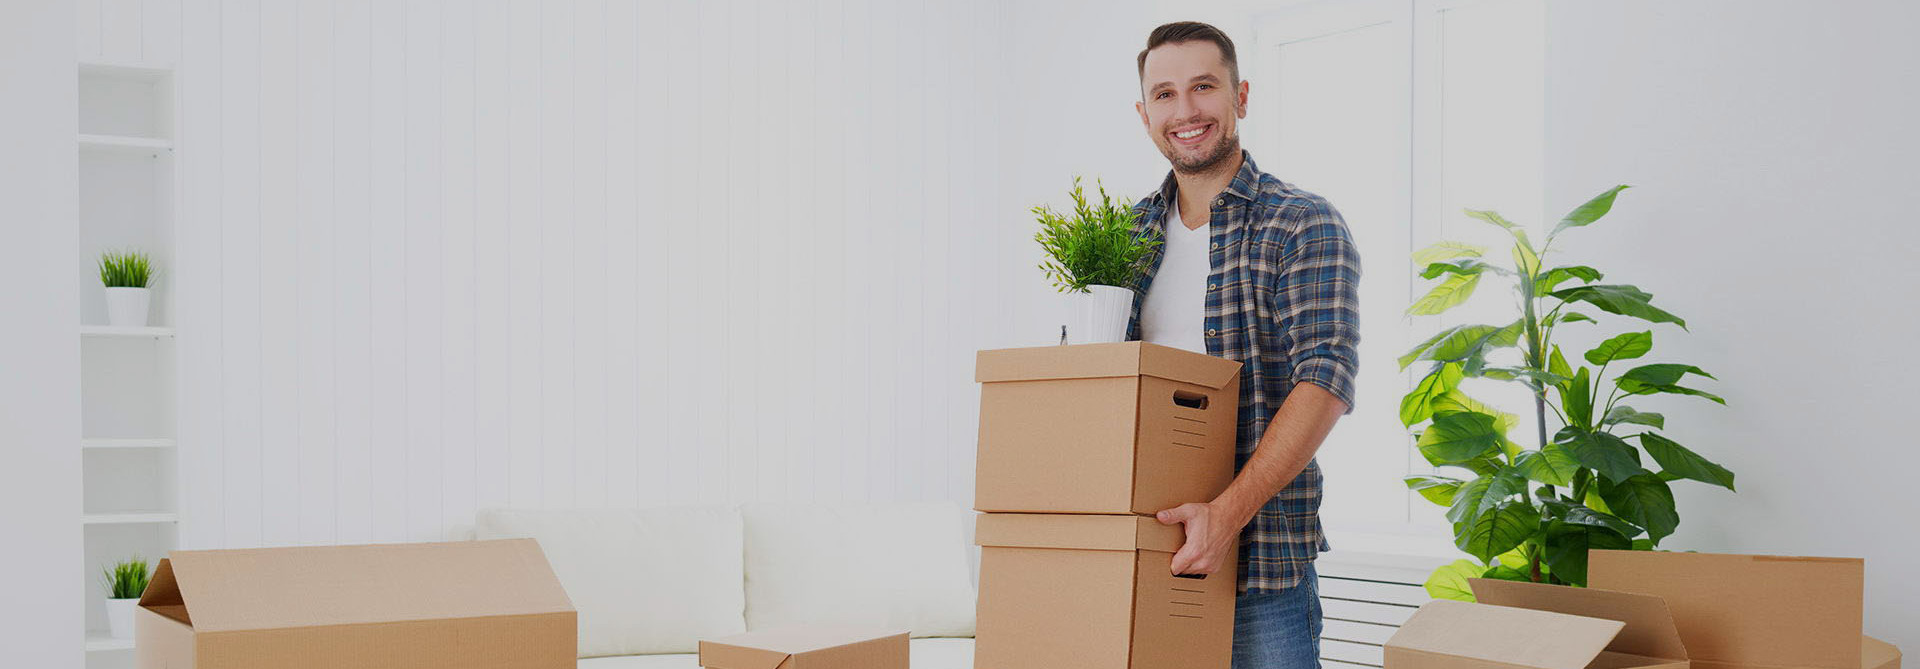 Packers and movers service